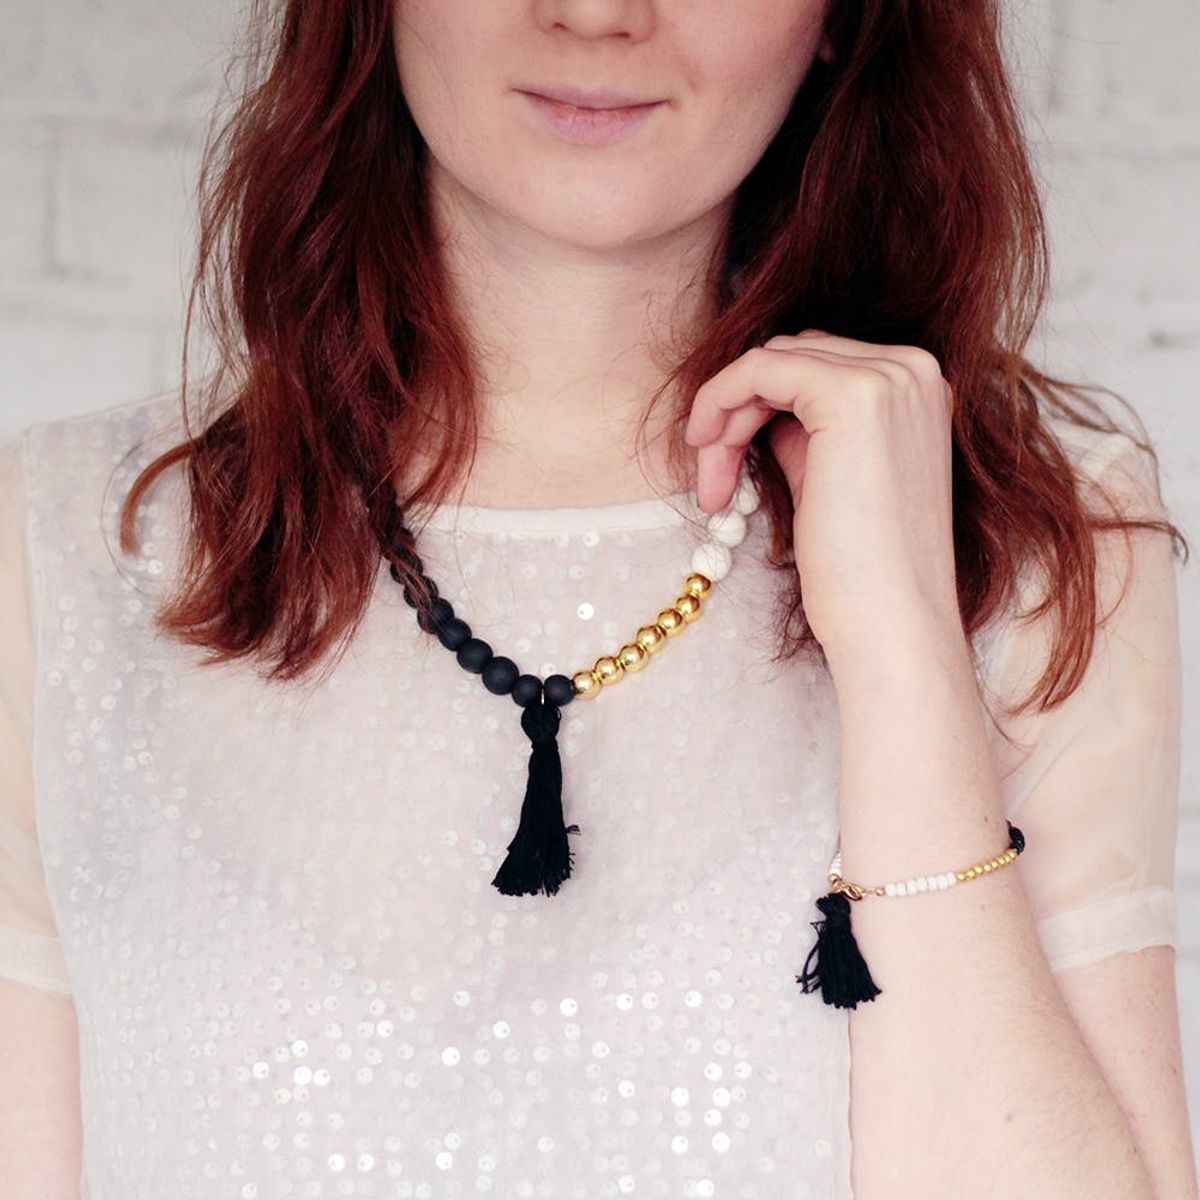 This Is the DIY Necklace Your Mom ACTUALLY Wants for Mother’s Day